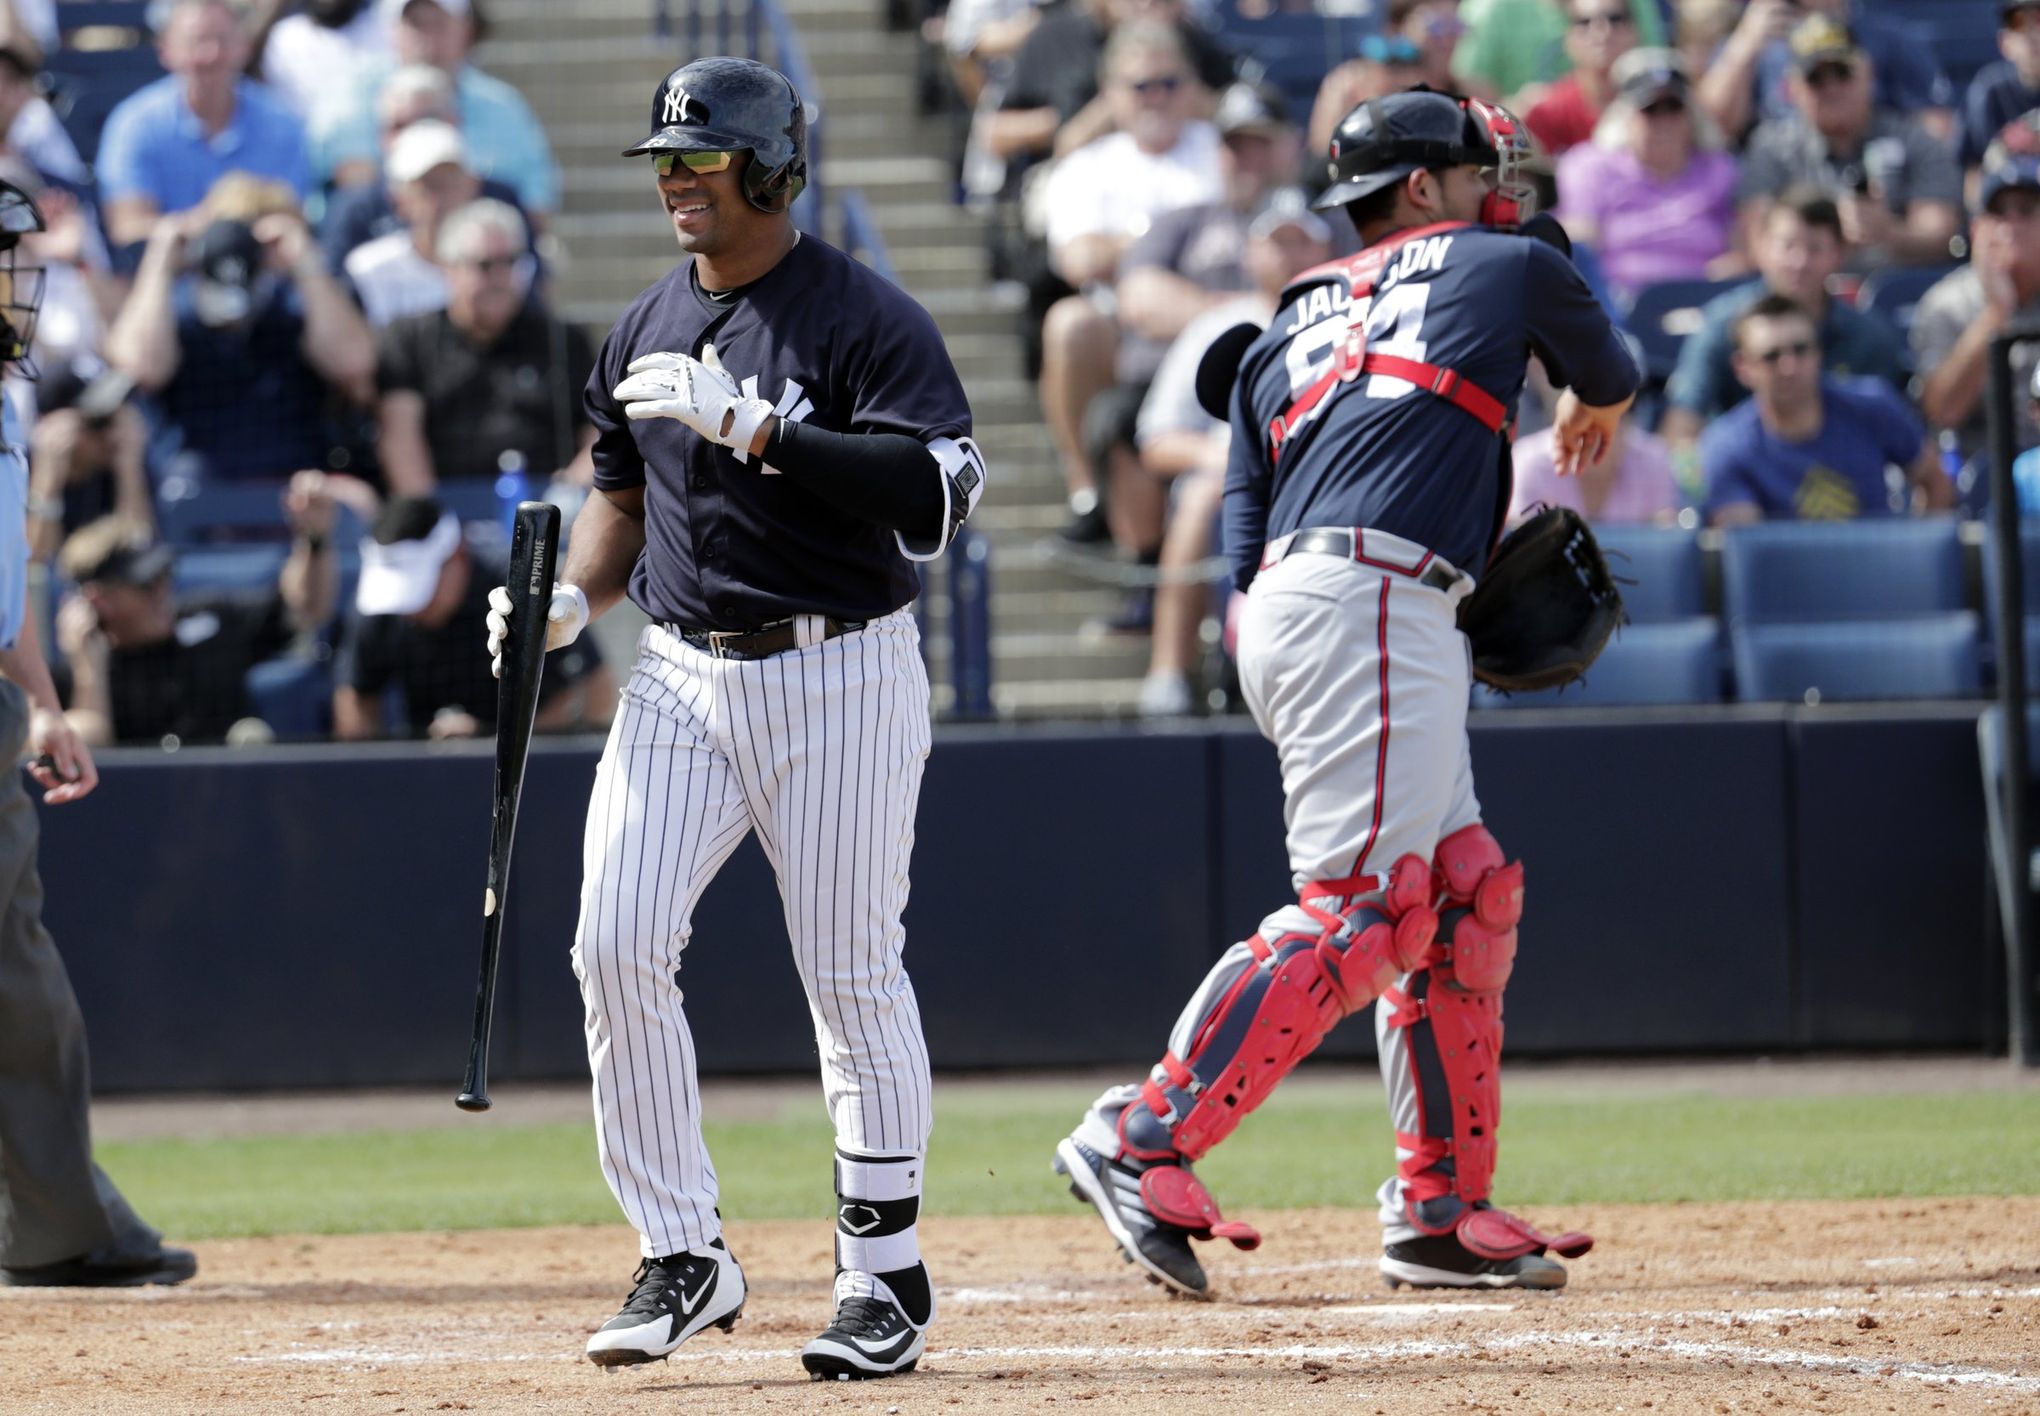 Watch: Seahawks QB Russell Wilson strikes out in his first at-bat for New  York Yankees